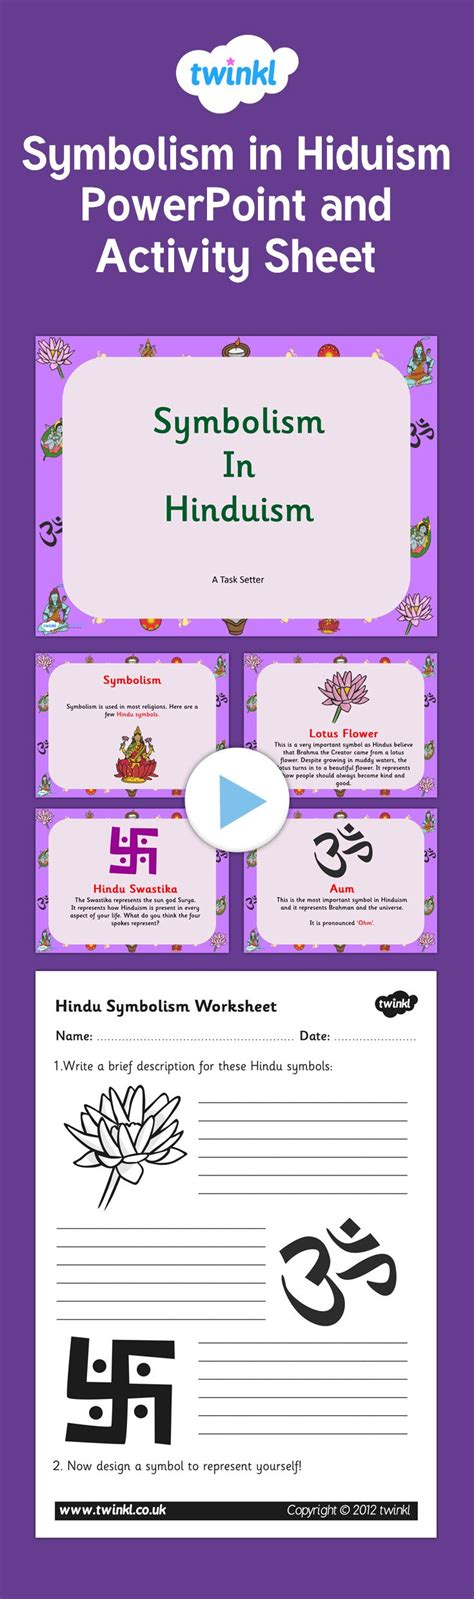 Symbolism In Hinduism Powerpoint And Activity Sheet Pack This